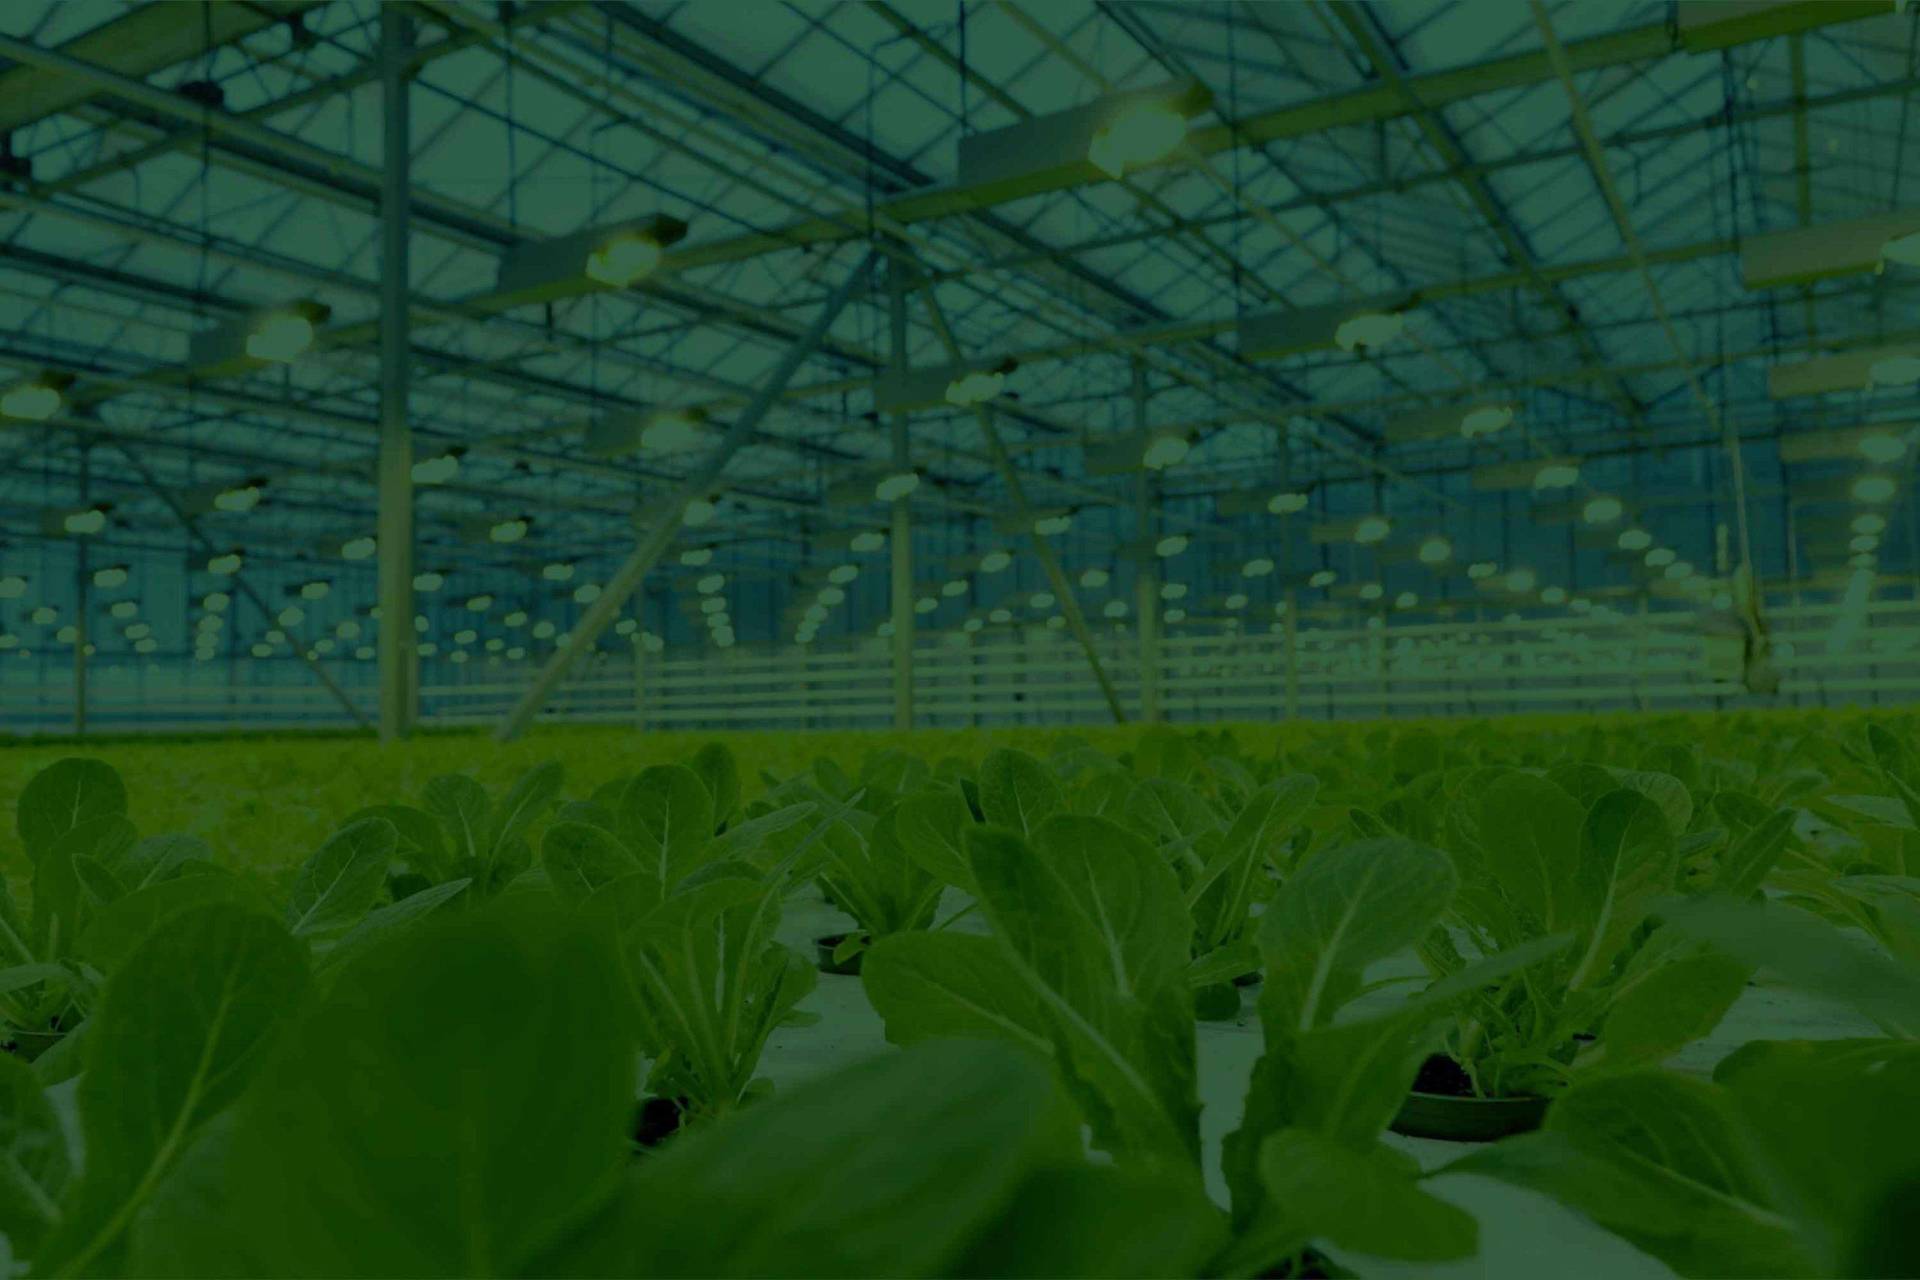 Smart wireless control for large challenging environments like horticulture (green houses, vertical farming)